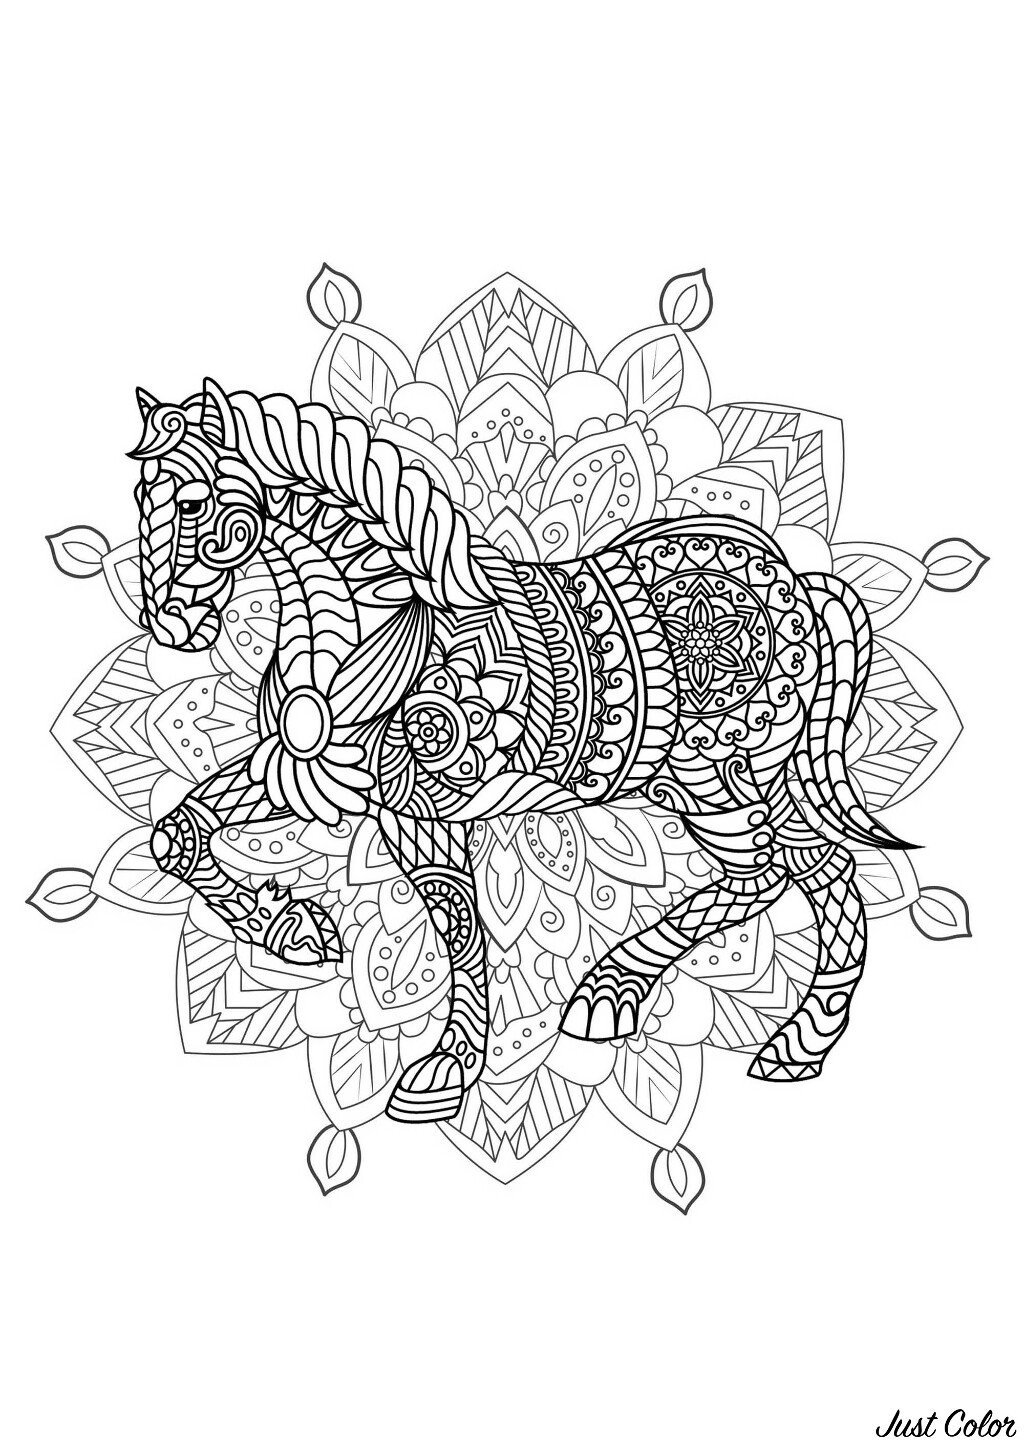 Mandala to color with beautiful Horse and complex patterns in background